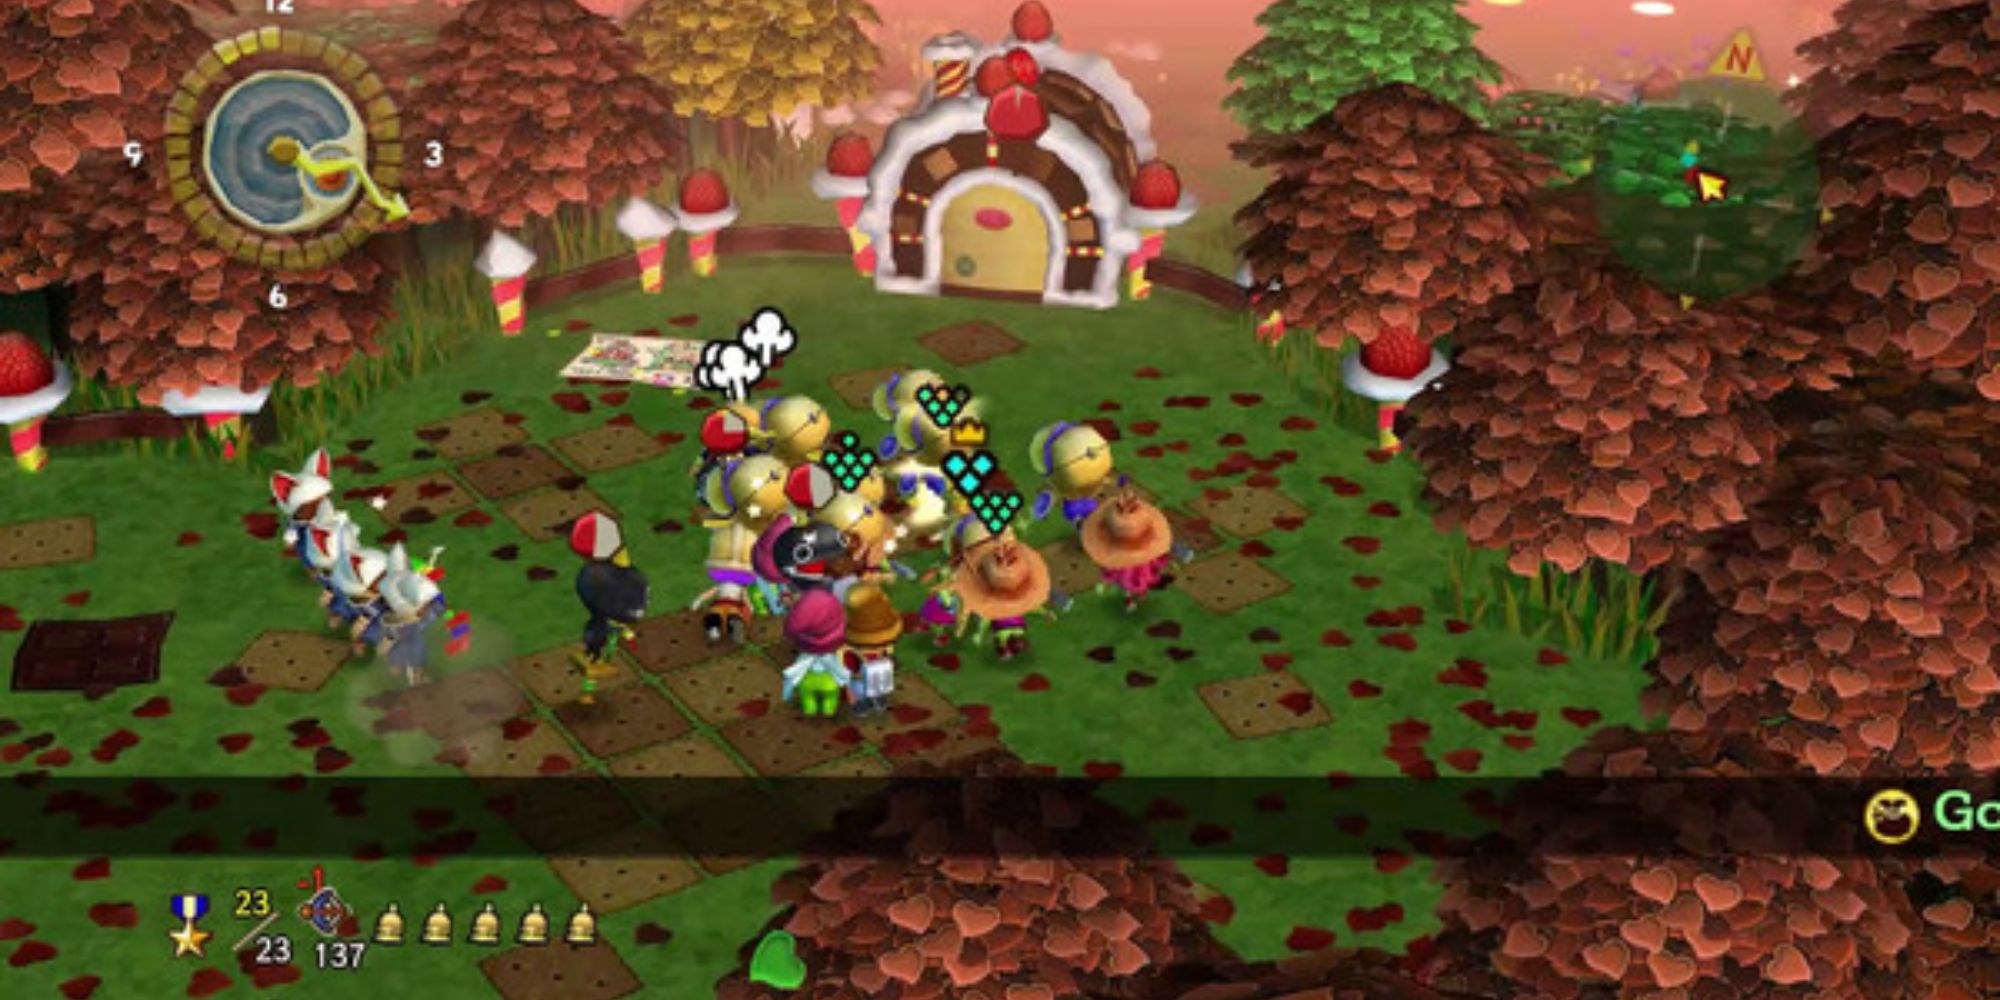 A screenshot showcasing gameplay from Little King’s Story